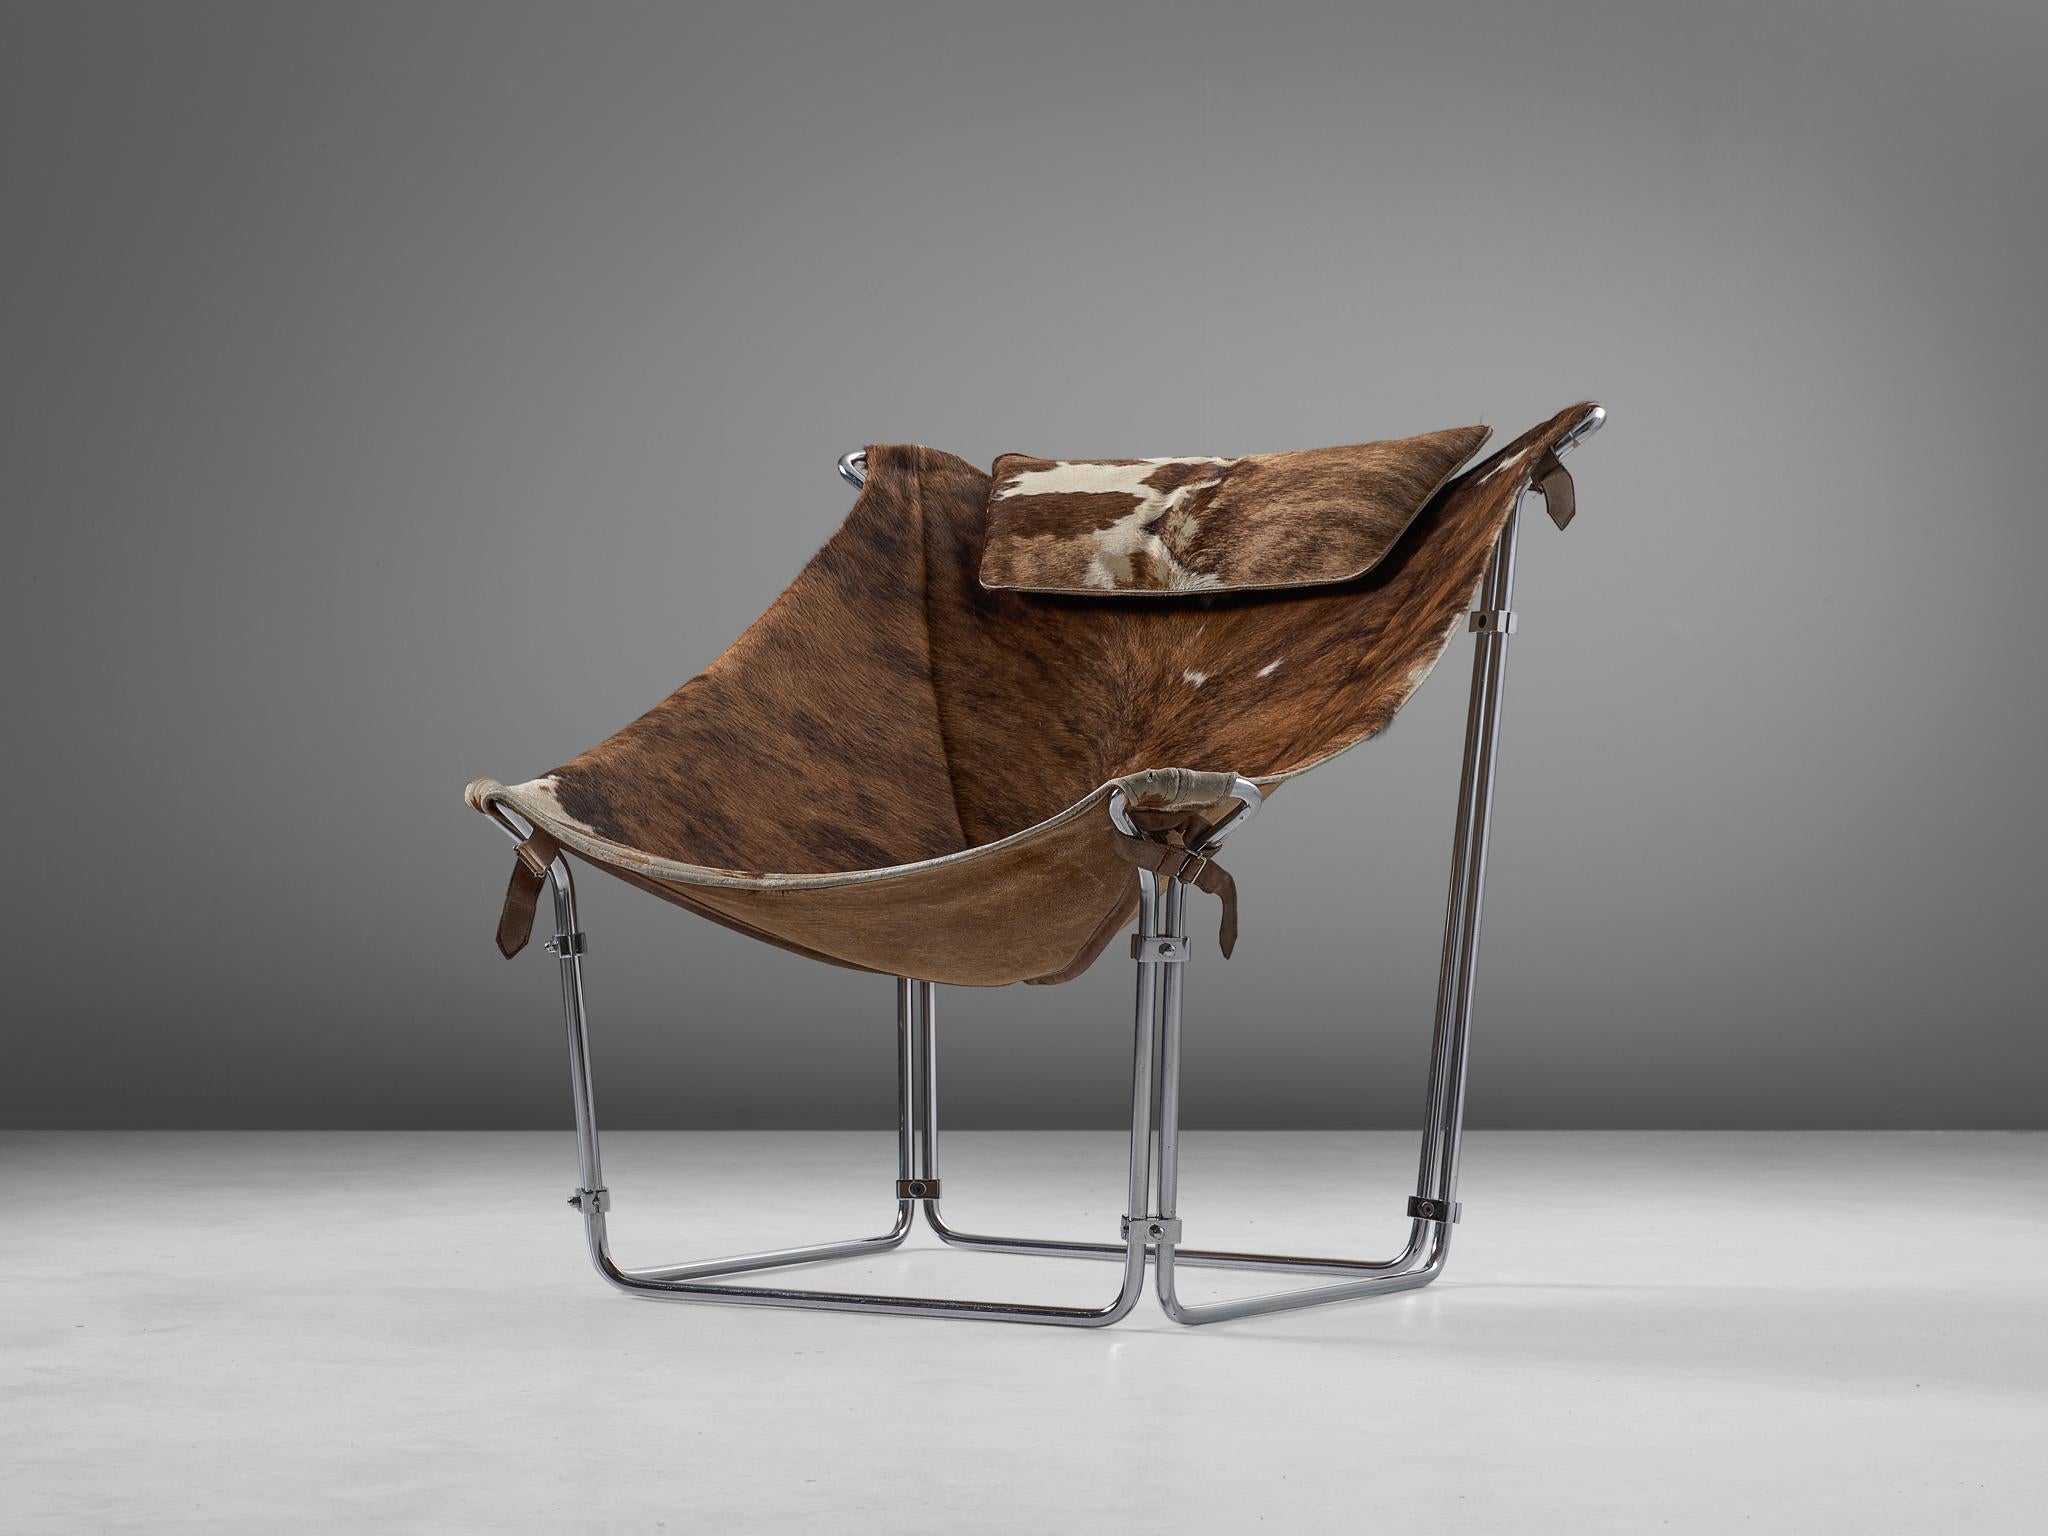 Kwok Hoi Chan for Steiner, lounge chair, cow hide, tubular steel, France, 1969.

This extraordinary lounge chair by Kwok Hoi Chan is produced by Steiner, Paris. What marks this design is the frame made of tubular steel, covered with a beautiful